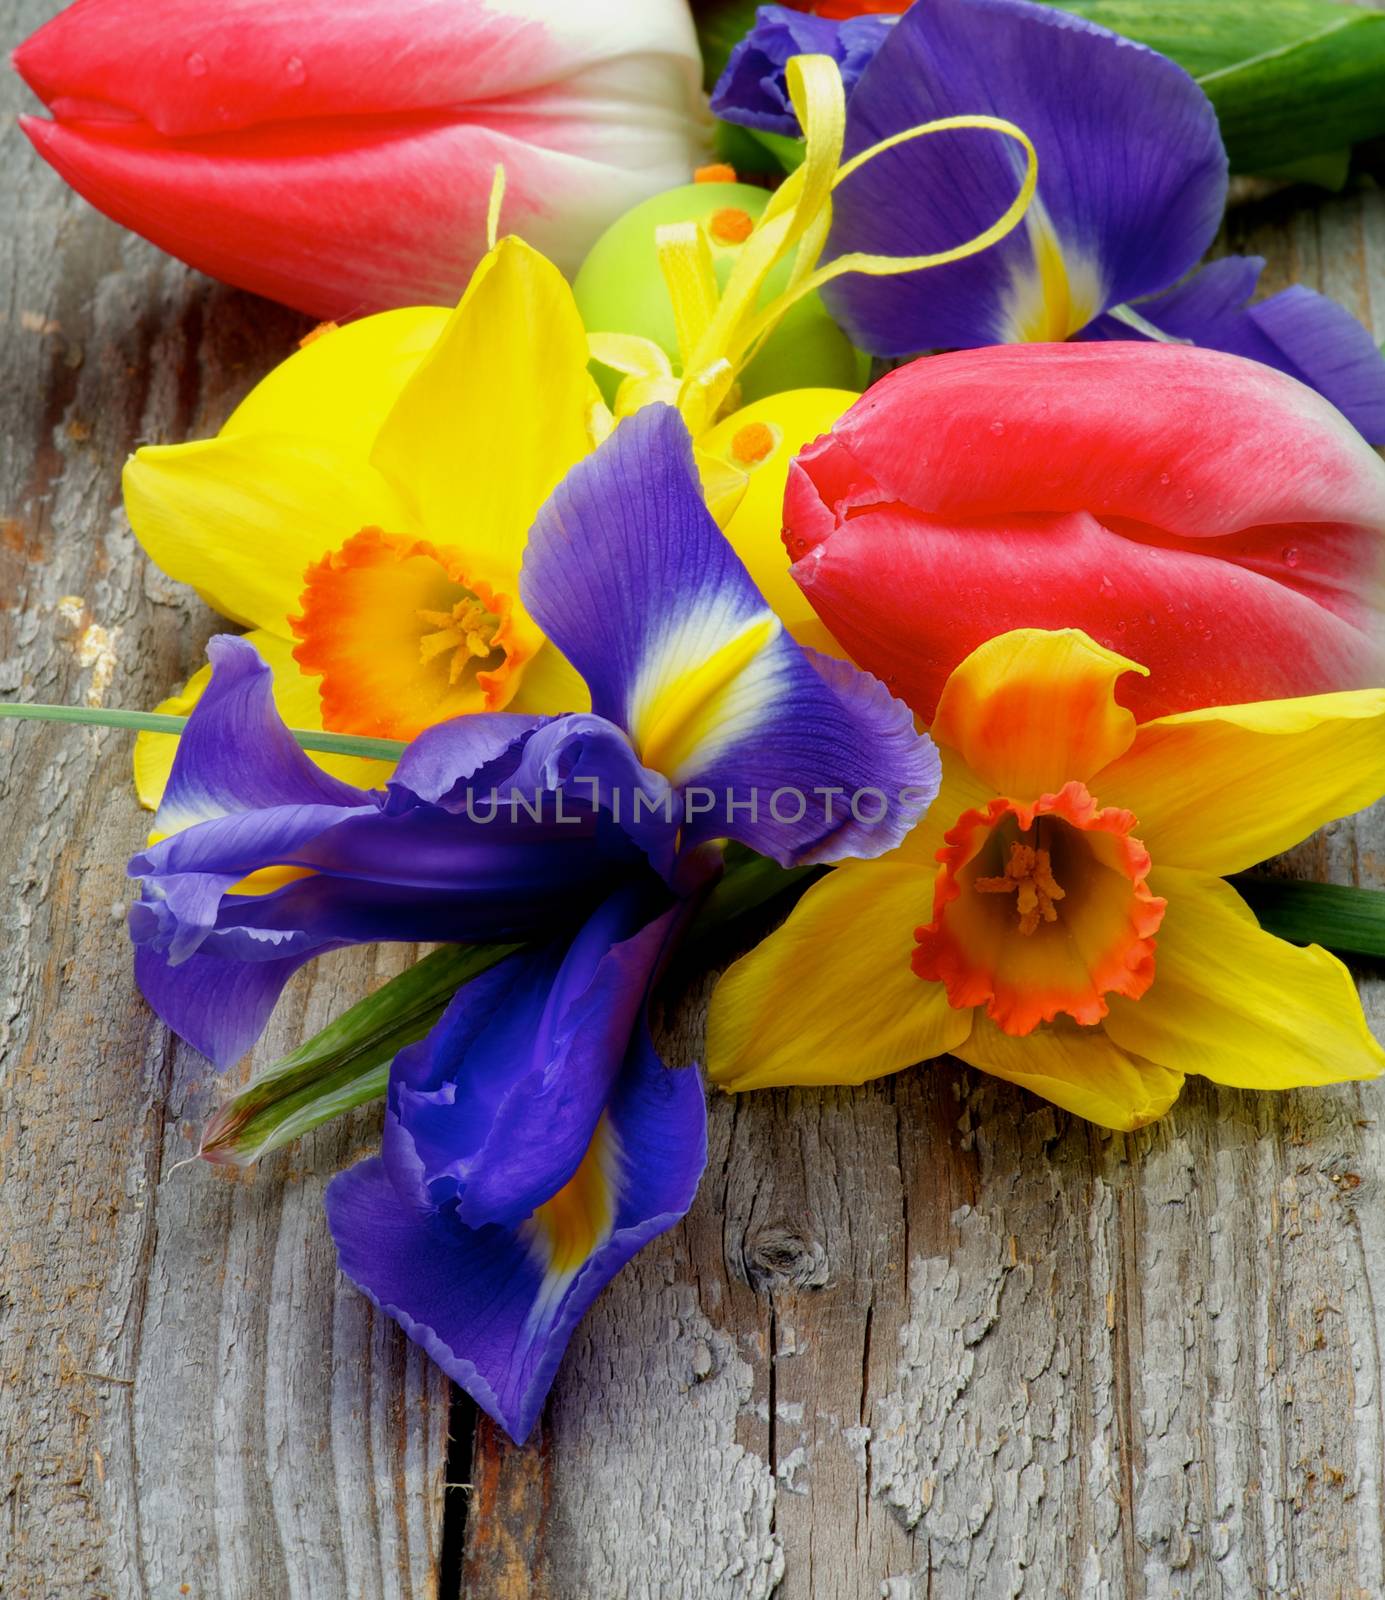 Arrangement of Yellow Daffodils, Magenta Tulips, Purple Irises with Yellow and Green Spotted Easter Eggs closeup on Rustic Wooden background